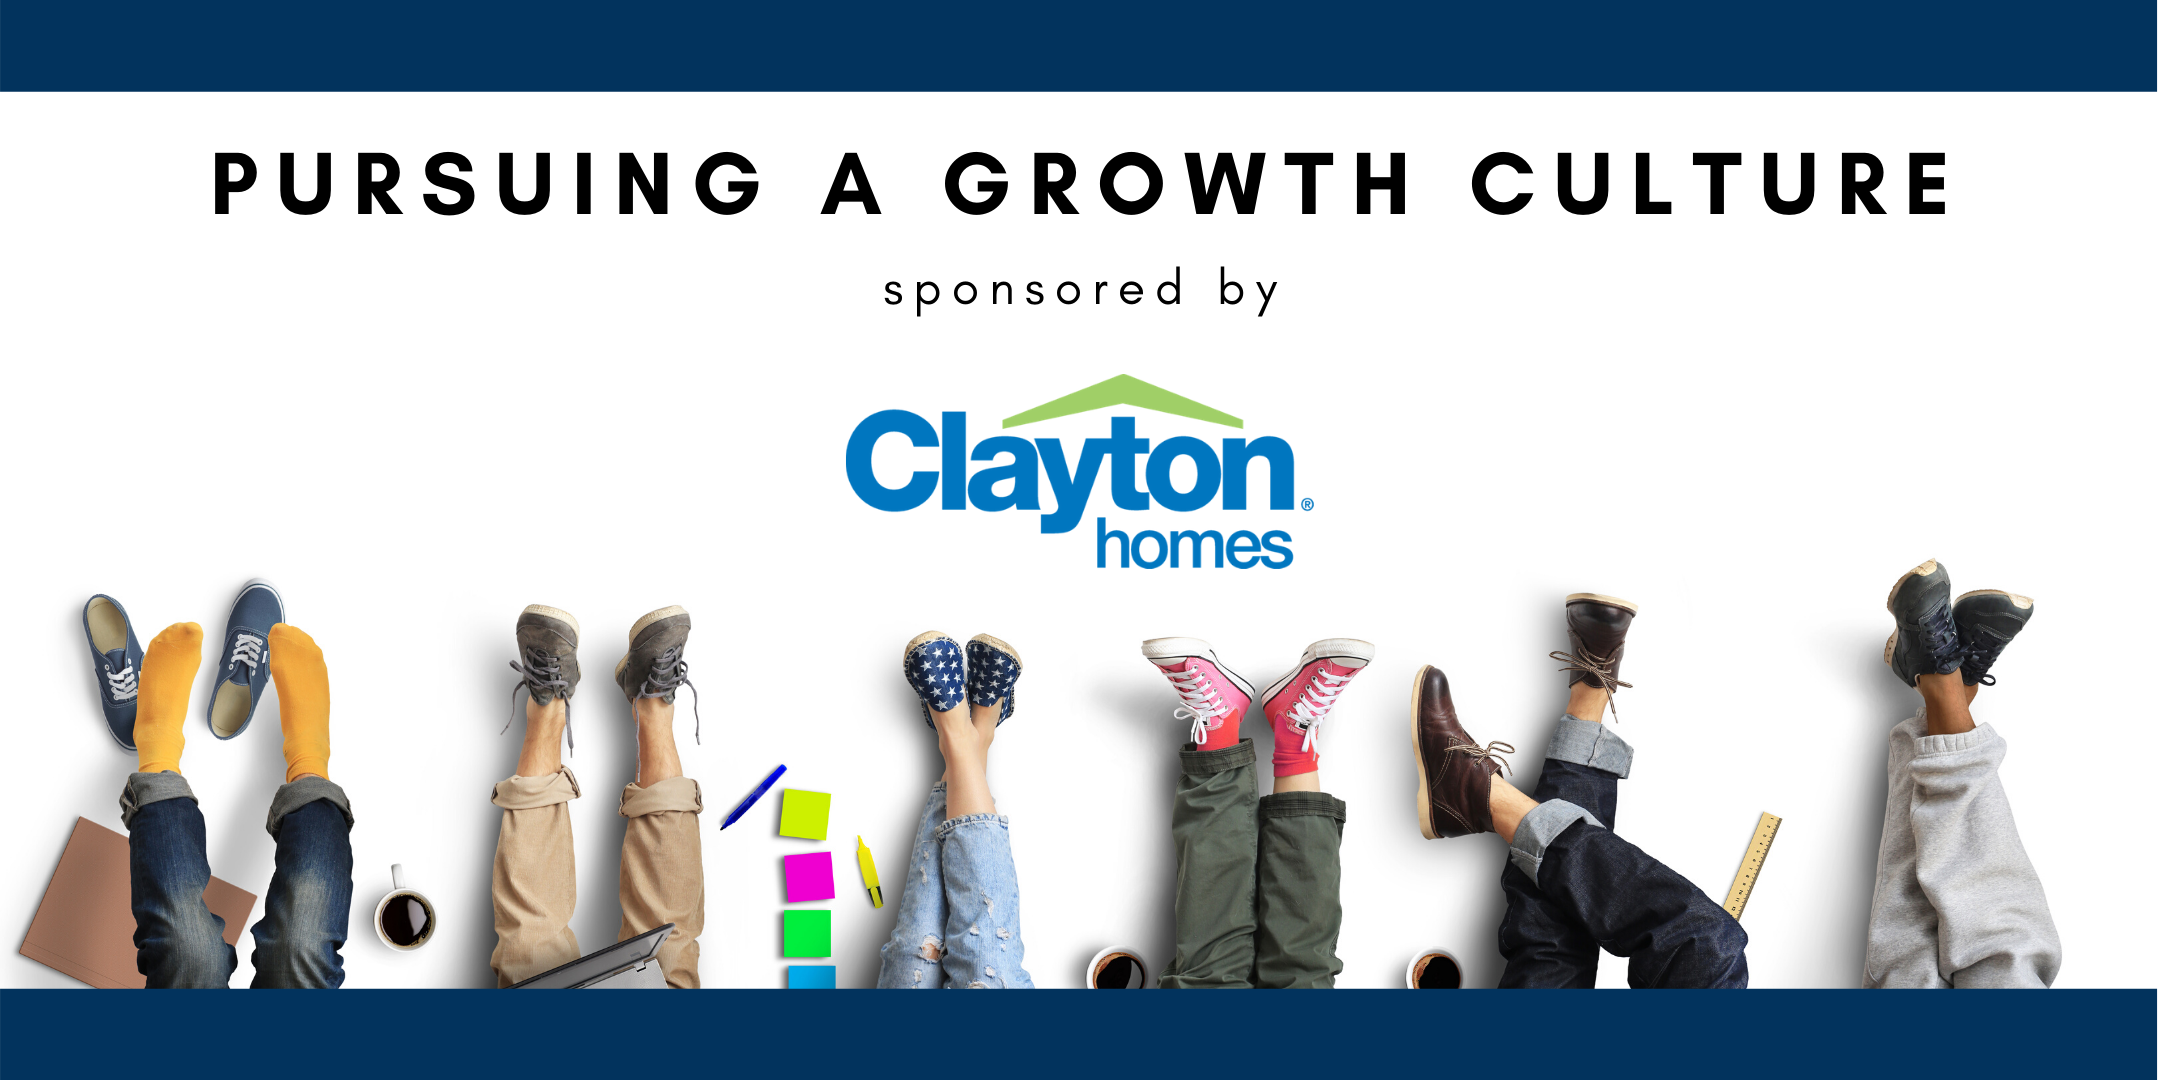 Pursuing A Growth Culture, Sponsored by Clayton Homes